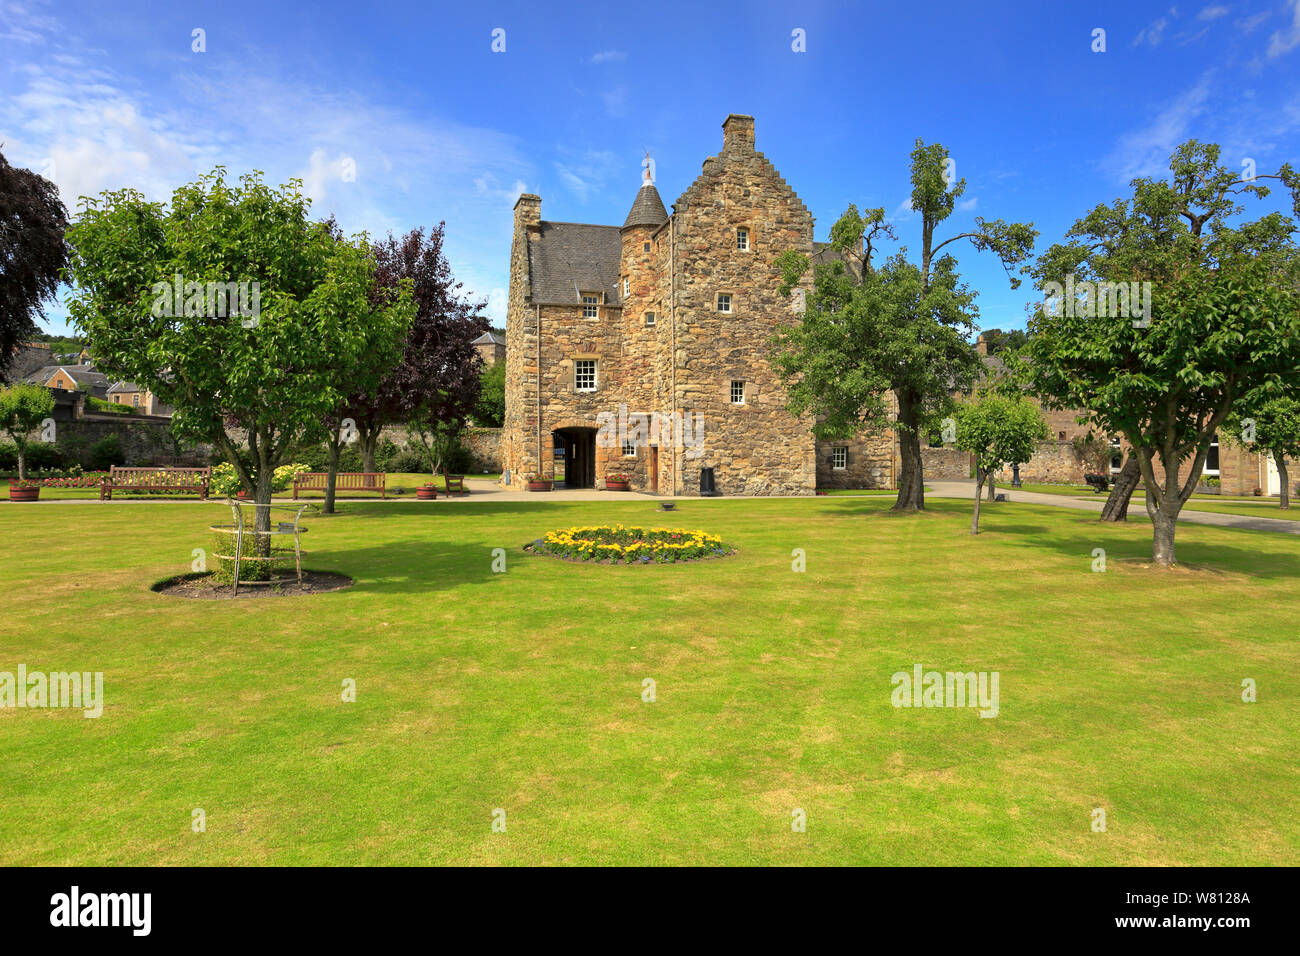 Mary Queen of Scots House and Visitors Centre, Jedburgh, Scottish Borders, Scotland, UK. Stock Photo